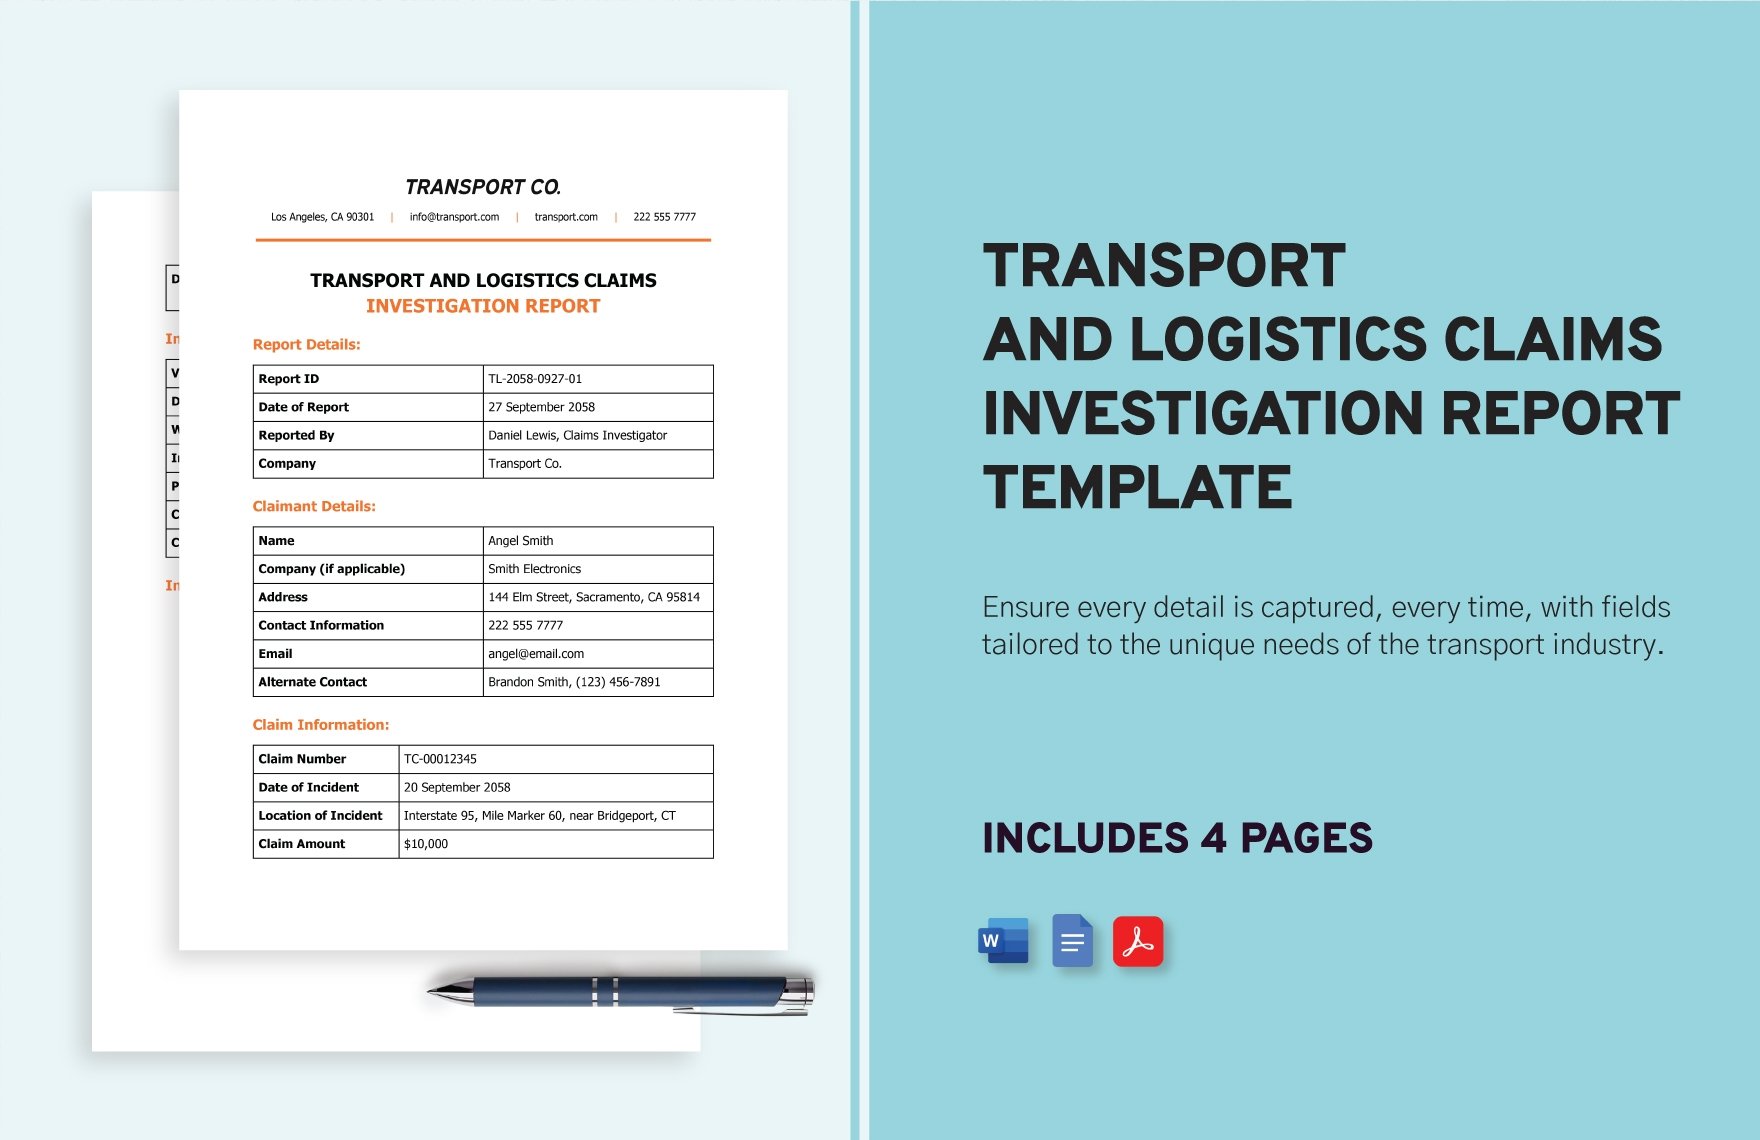 Transport and Logistics Claims Investigation Report Template